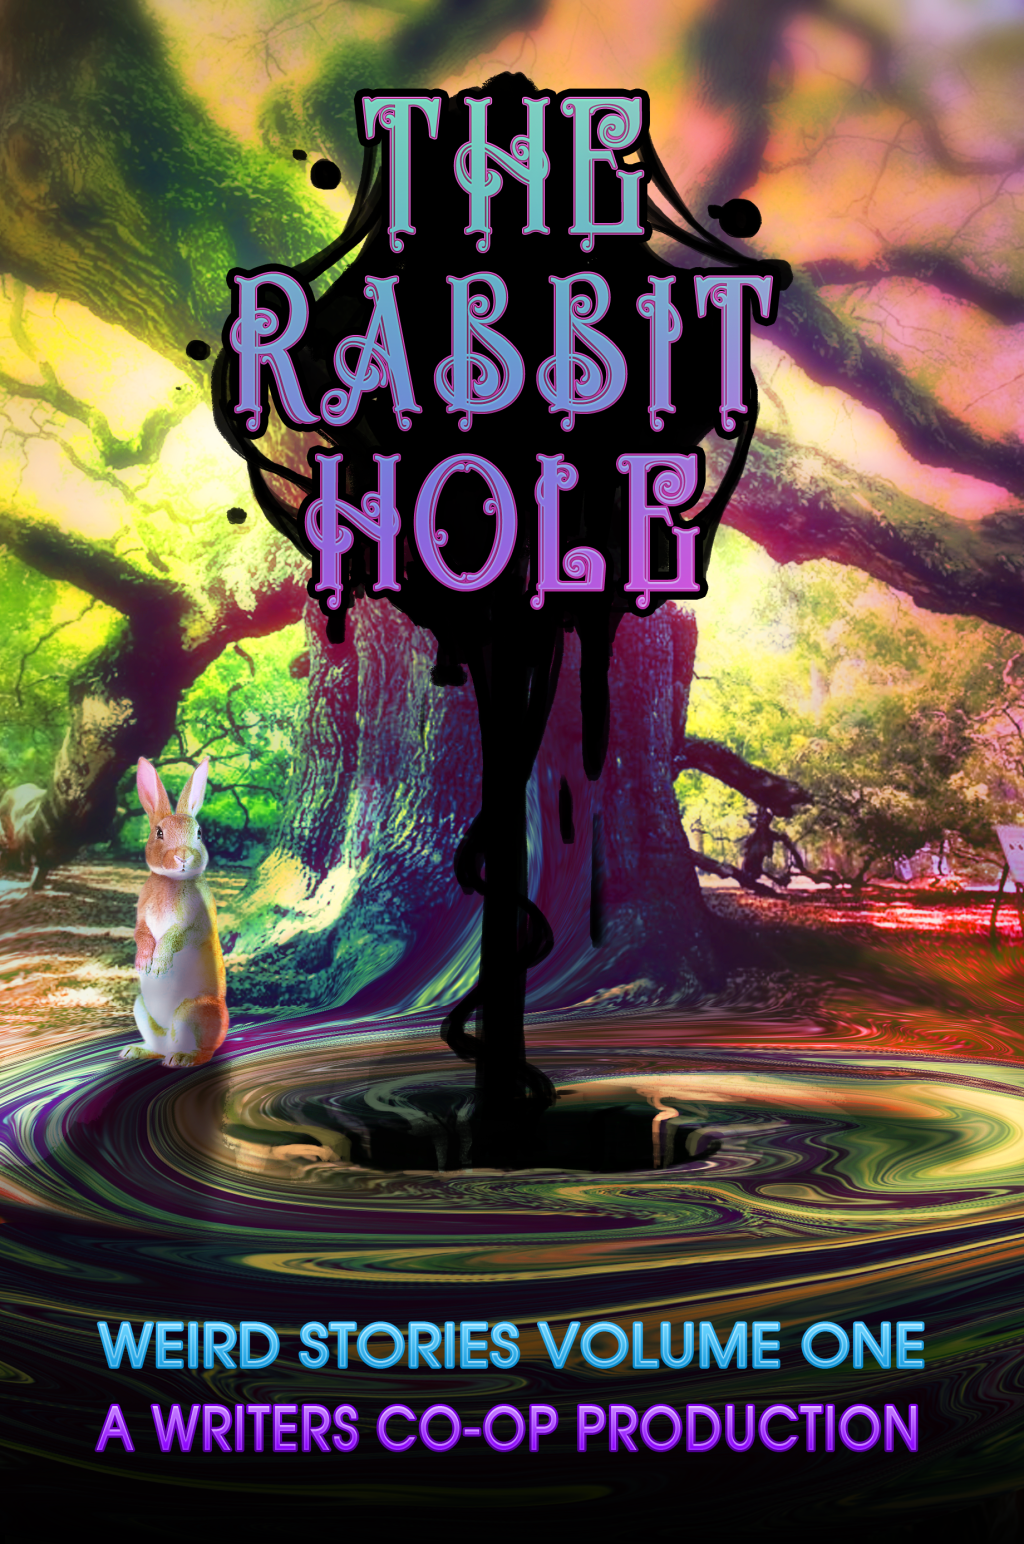 Welcome to The Rabbit Hole!